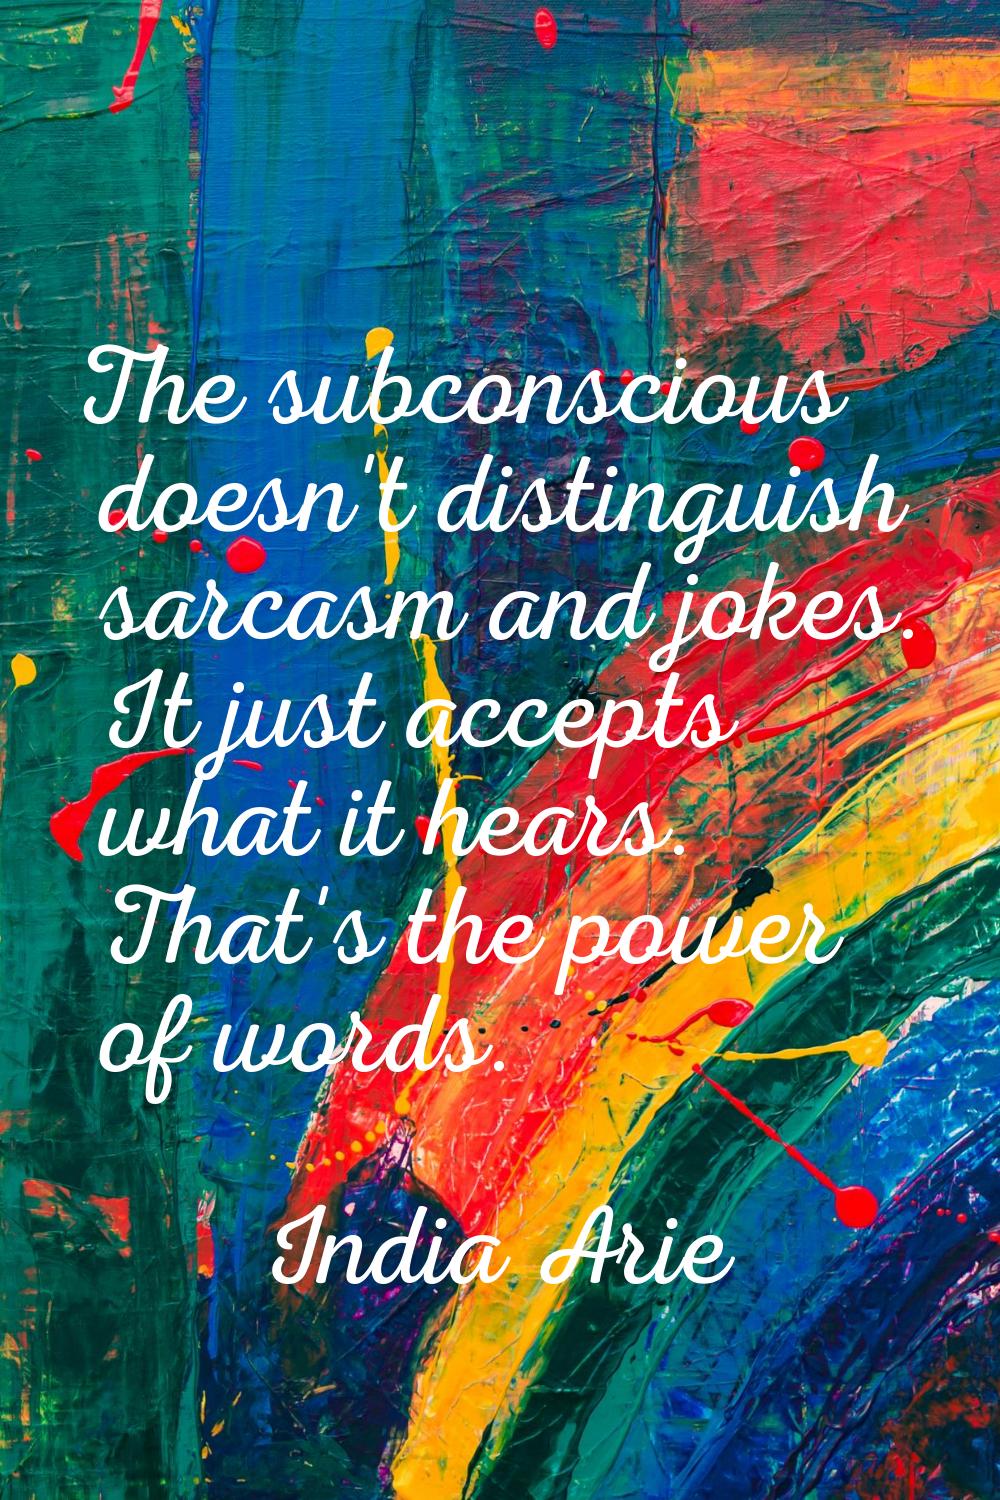 The subconscious doesn't distinguish sarcasm and jokes. It just accepts what it hears. That's the p